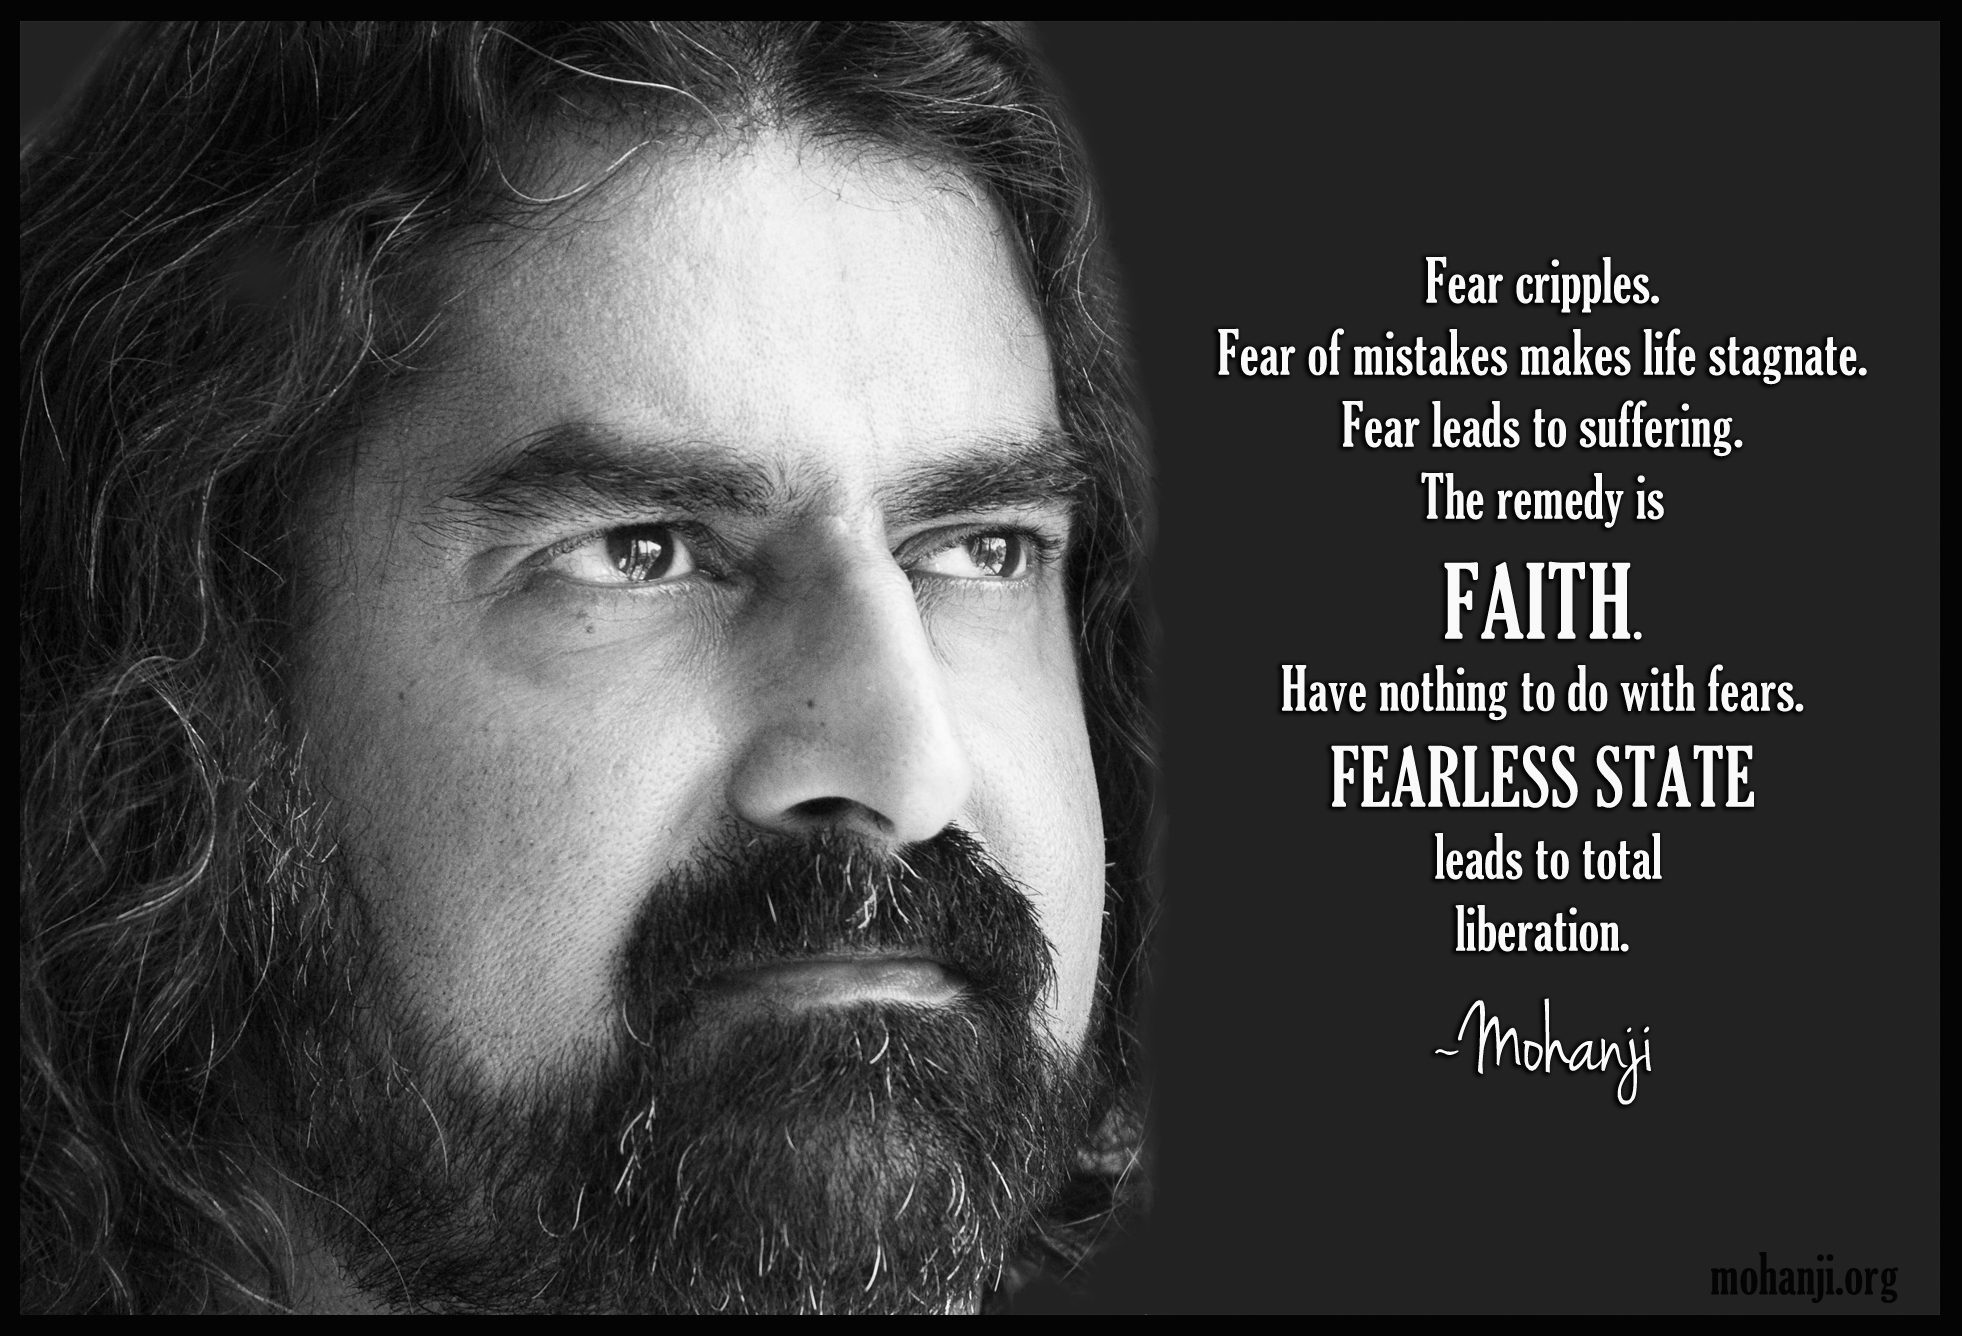 mohanji-quote-fear-cripples